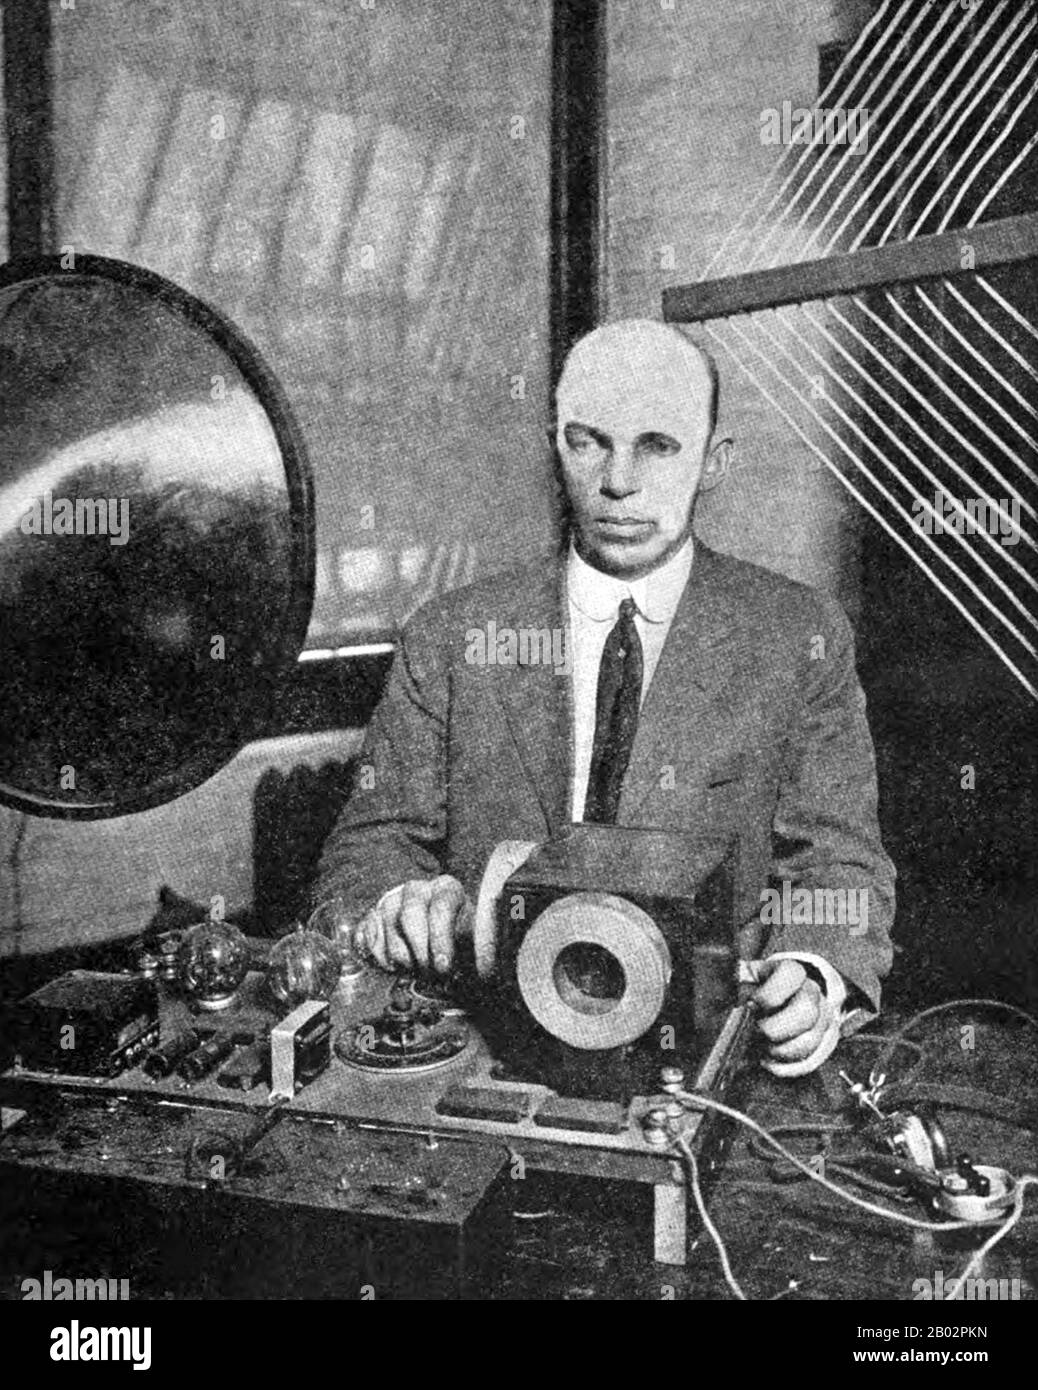 Edwin Howard Armstrong (December 18, 1890 – January 31, 1954) was an  American electrical engineer and inventor. He has been called 'the most  prolific and influential inventor in radio history'. He invented